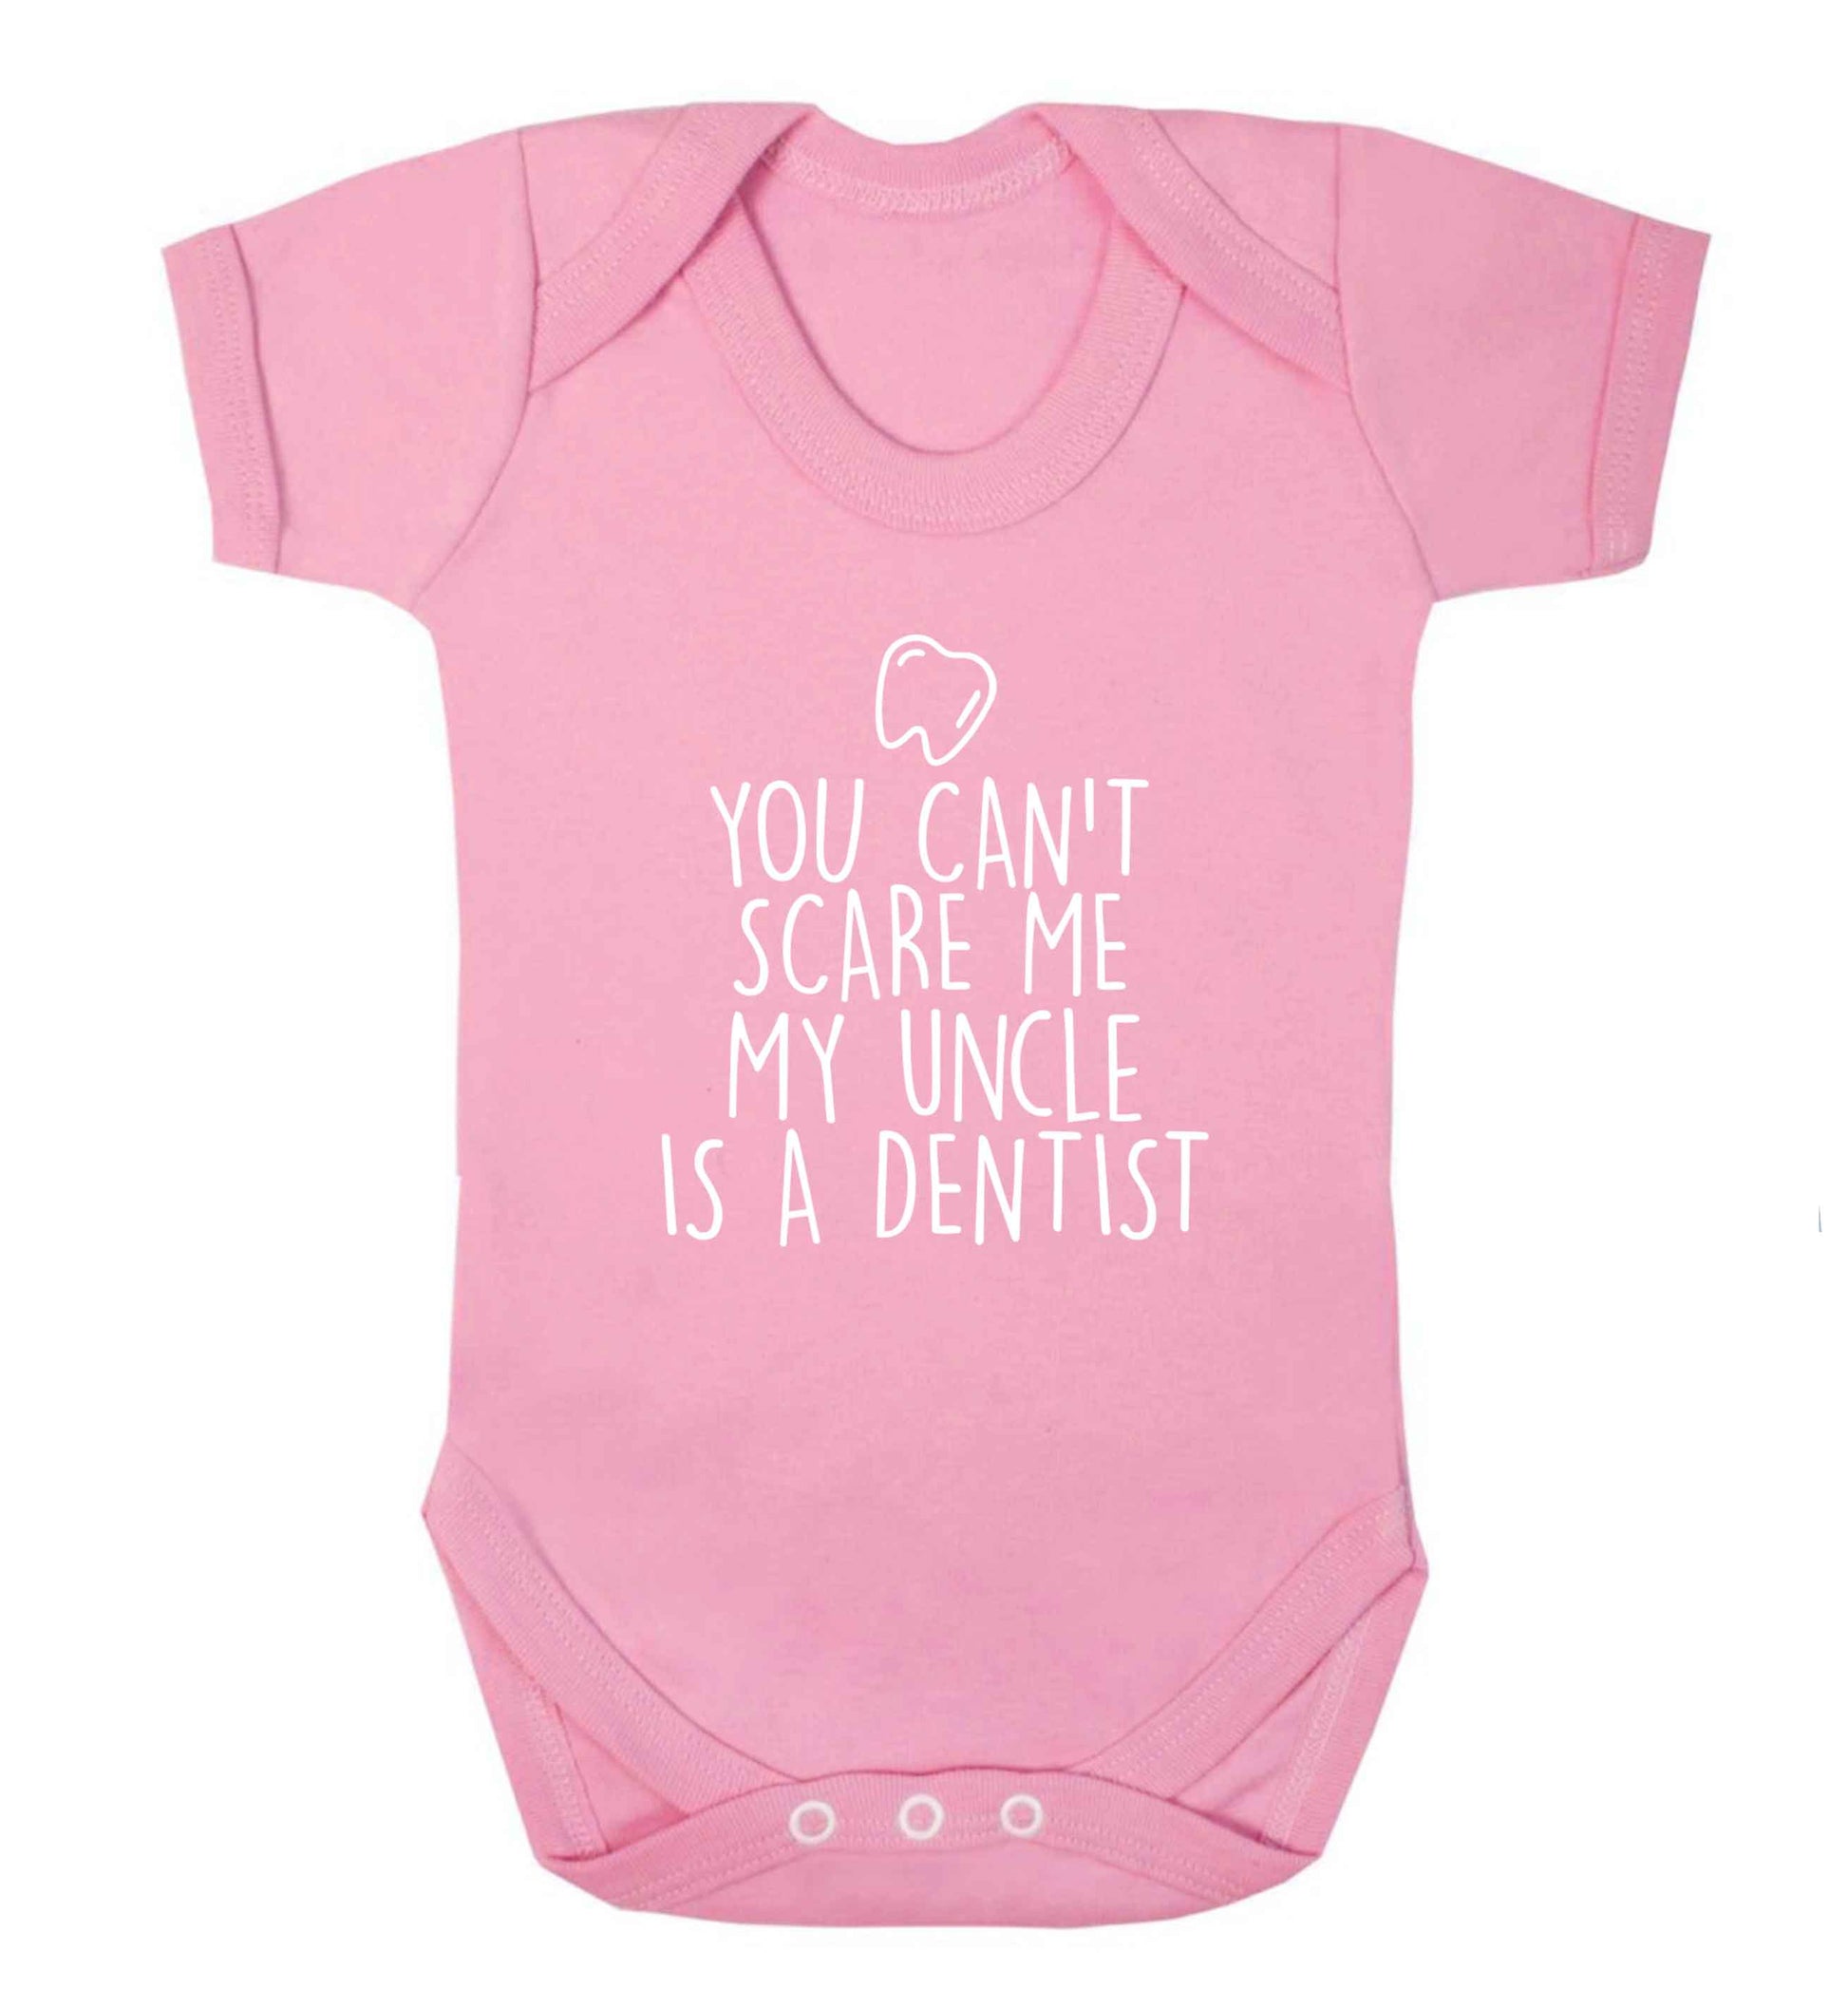 You can't scare me my uncle is a dentist baby vest pale pink 18-24 months